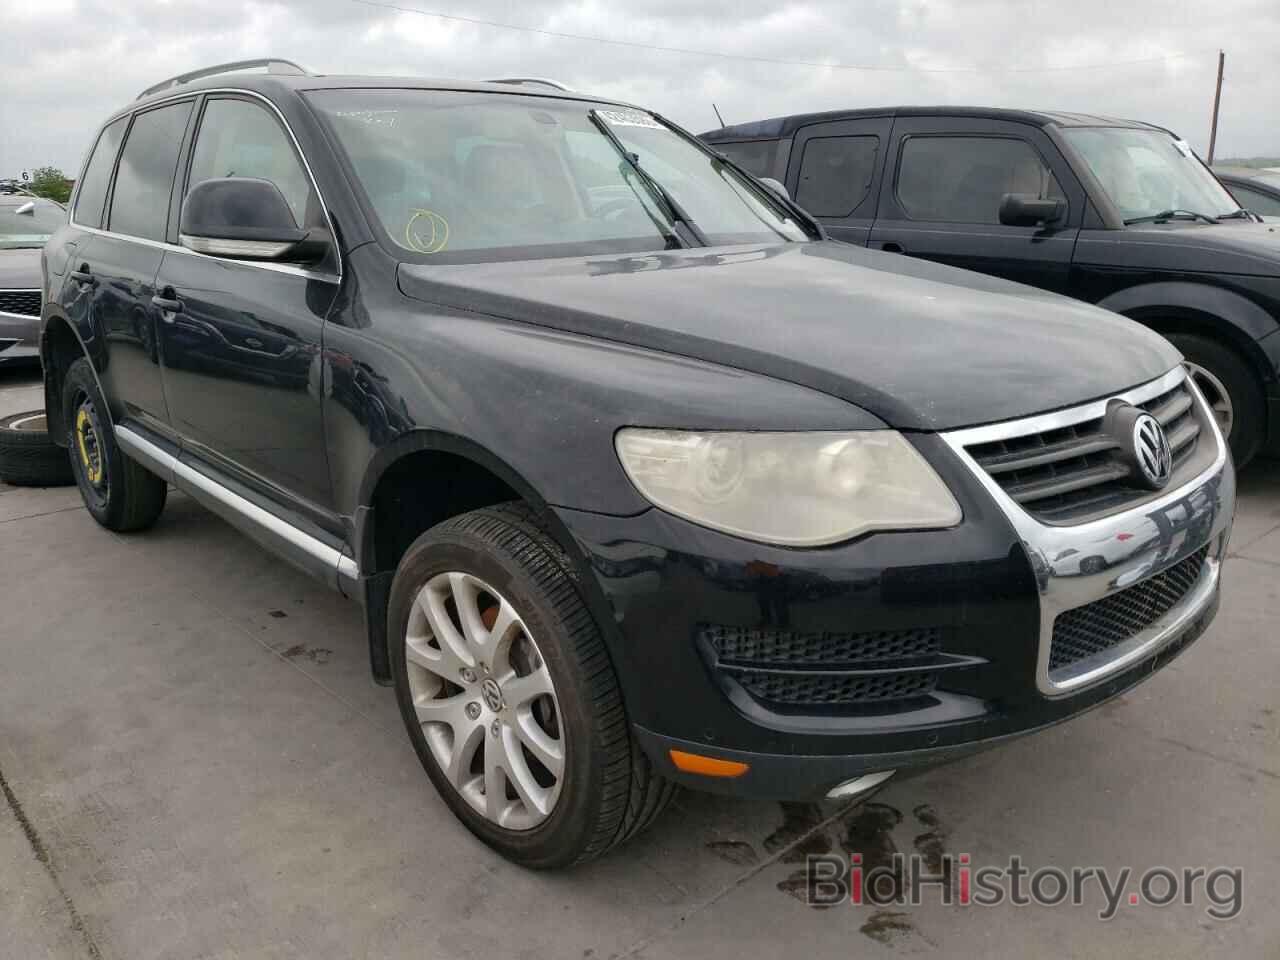 Photo WVGFK7A99AD002118 - VOLKSWAGEN TOUAREG TD 2010